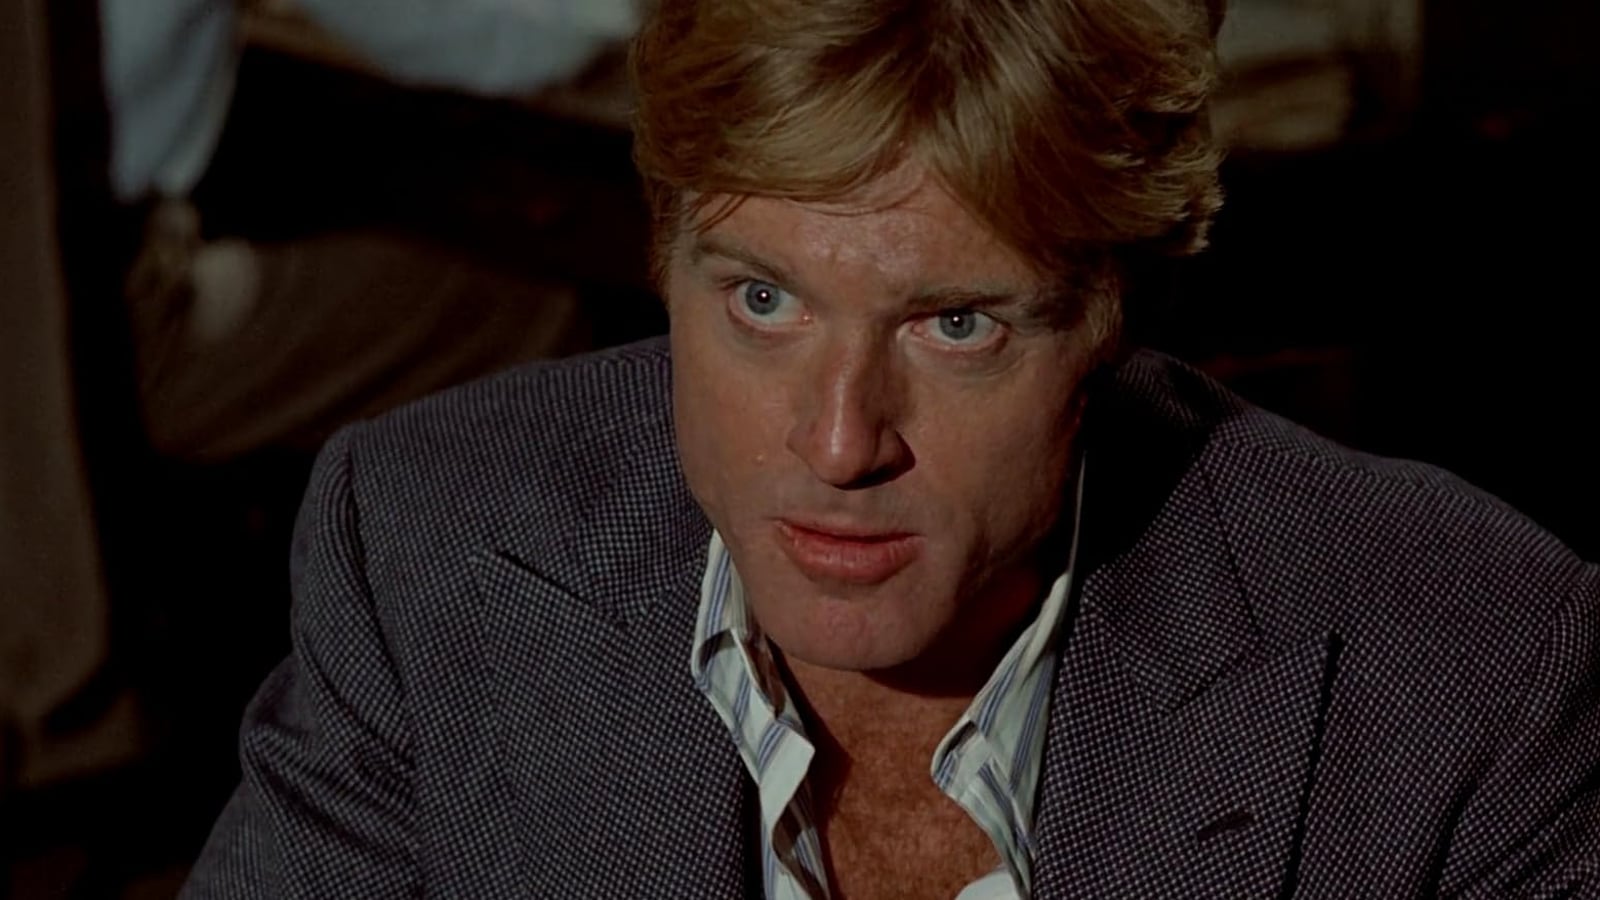 <p><em>Butch Cassidy and the Sundance Kid</em> was a huge hit, making over $100 million in ticket sales and earning seven Oscar nominations. But when Redford rejoined with Newman and director George Roy Hill for<em> The Sting</em>, they experienced even greater success, scoring over $150 million at the box office and netting ten Oscar nominations, including Redford’s only Best Actor nod. With an irresistible heist plot and Redford and Newman at their best, it’s no surprise that <em>The Sting</em> won over fans and critics alike.</p>